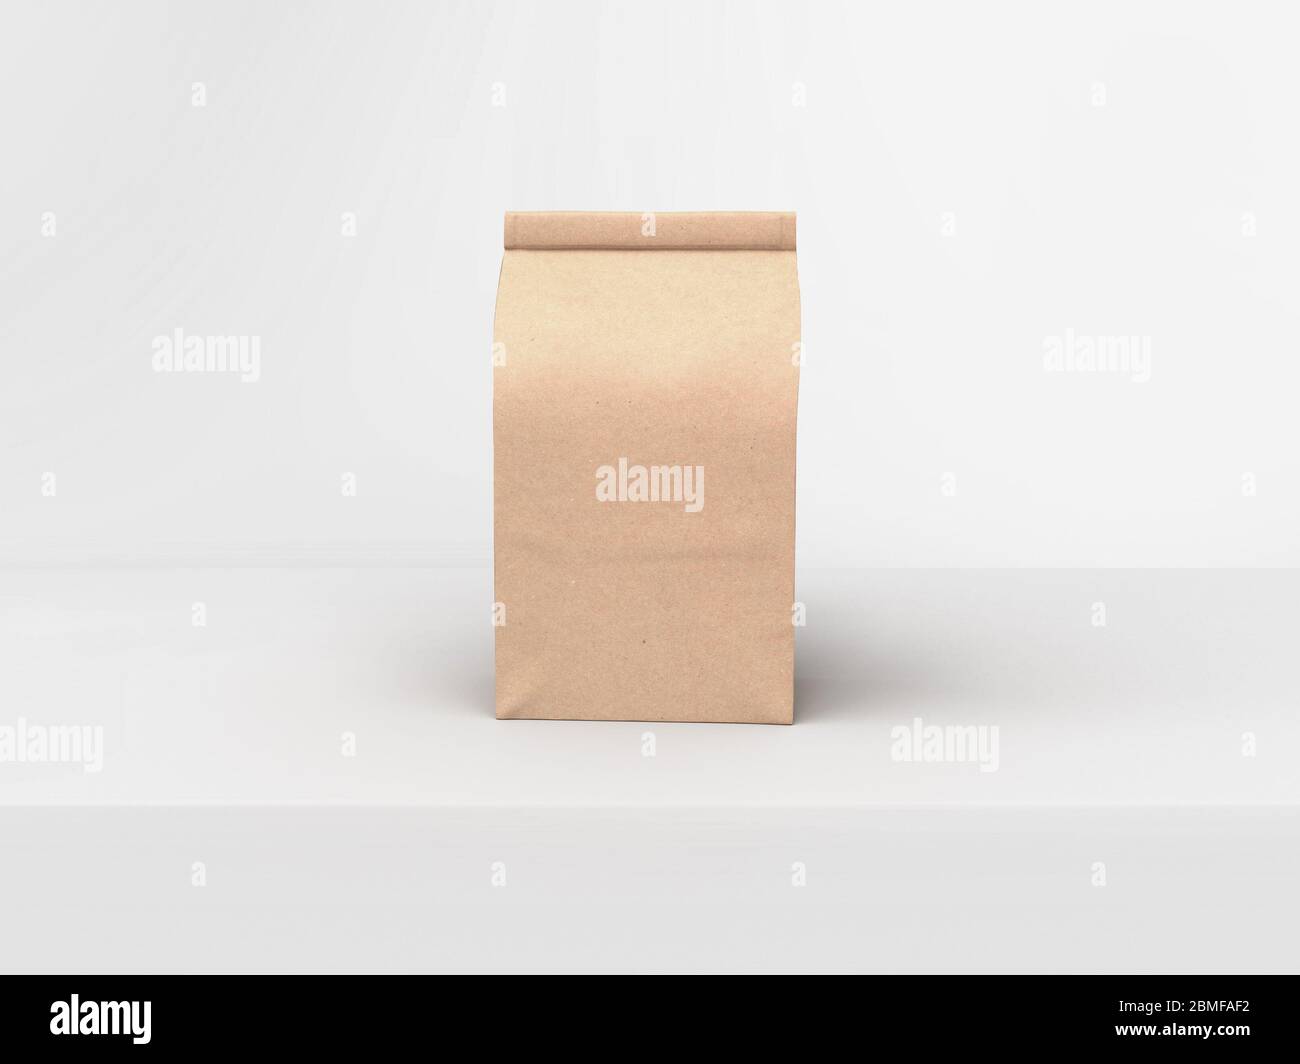 The coffee beam bag packaging mock-up design on light gray studio stage background Stock Photo